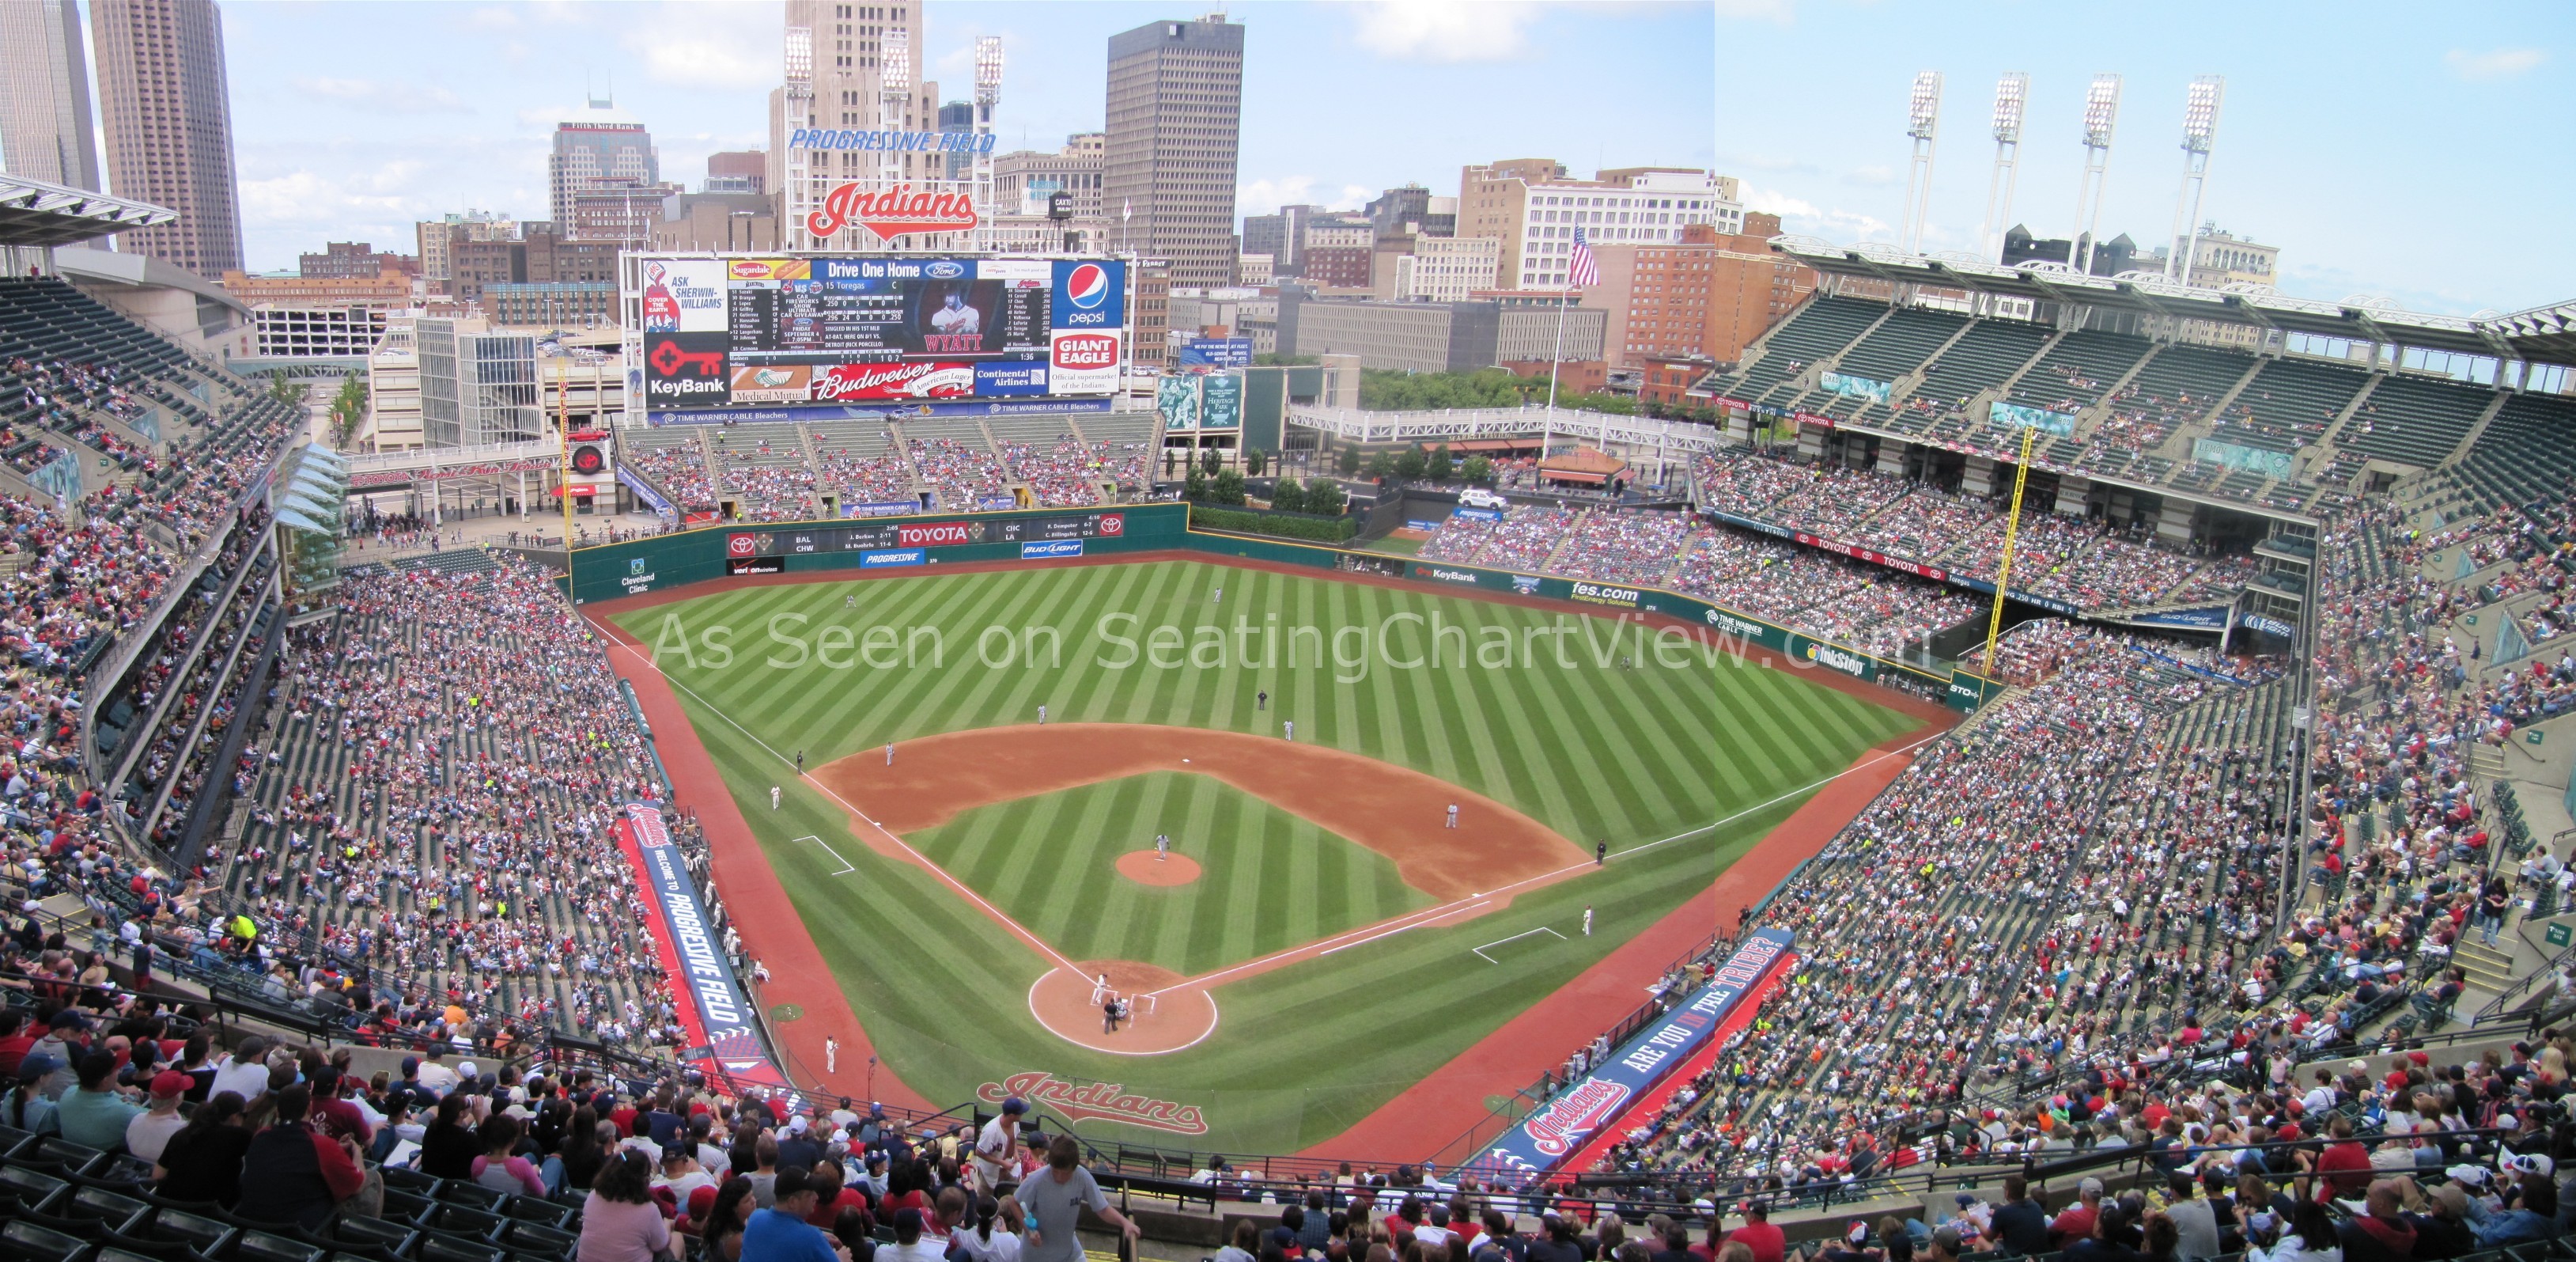 Progressive Field, Cleveland OH Seating Chart View